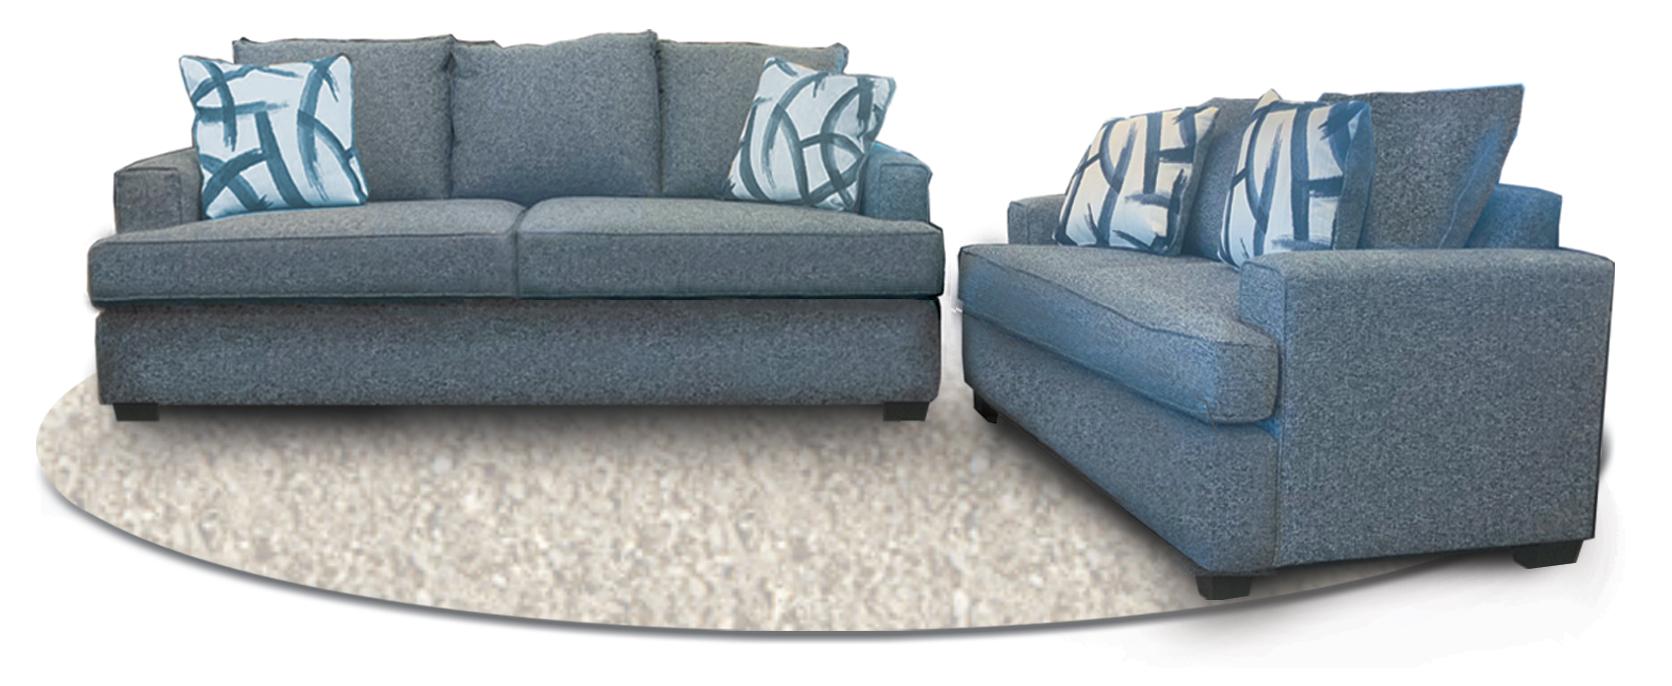 Blue Fabric Modern Love Seat with 2 Accent pillows Julie